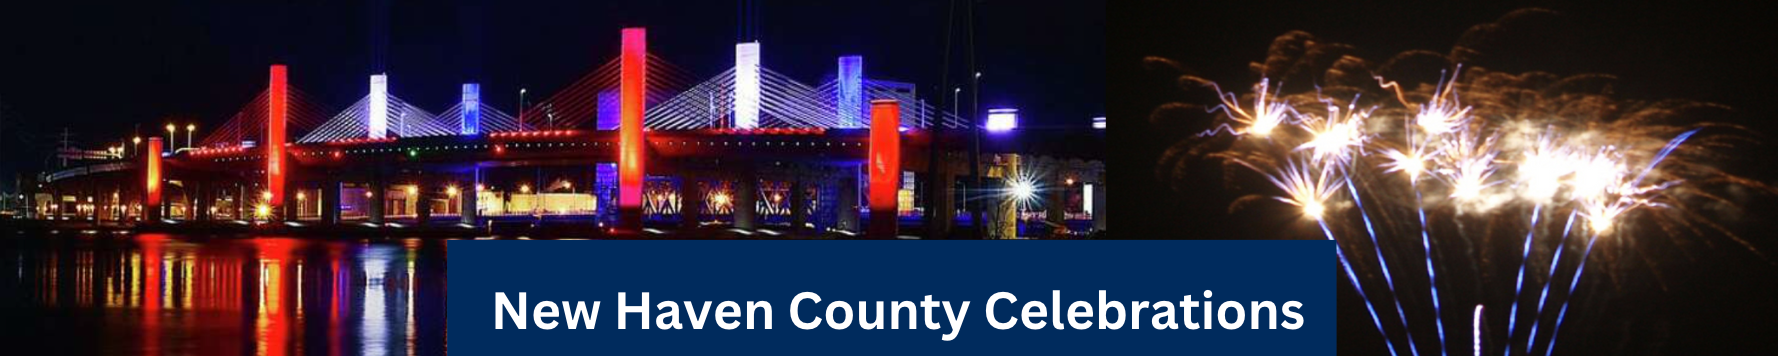 New Haven County Celebrations